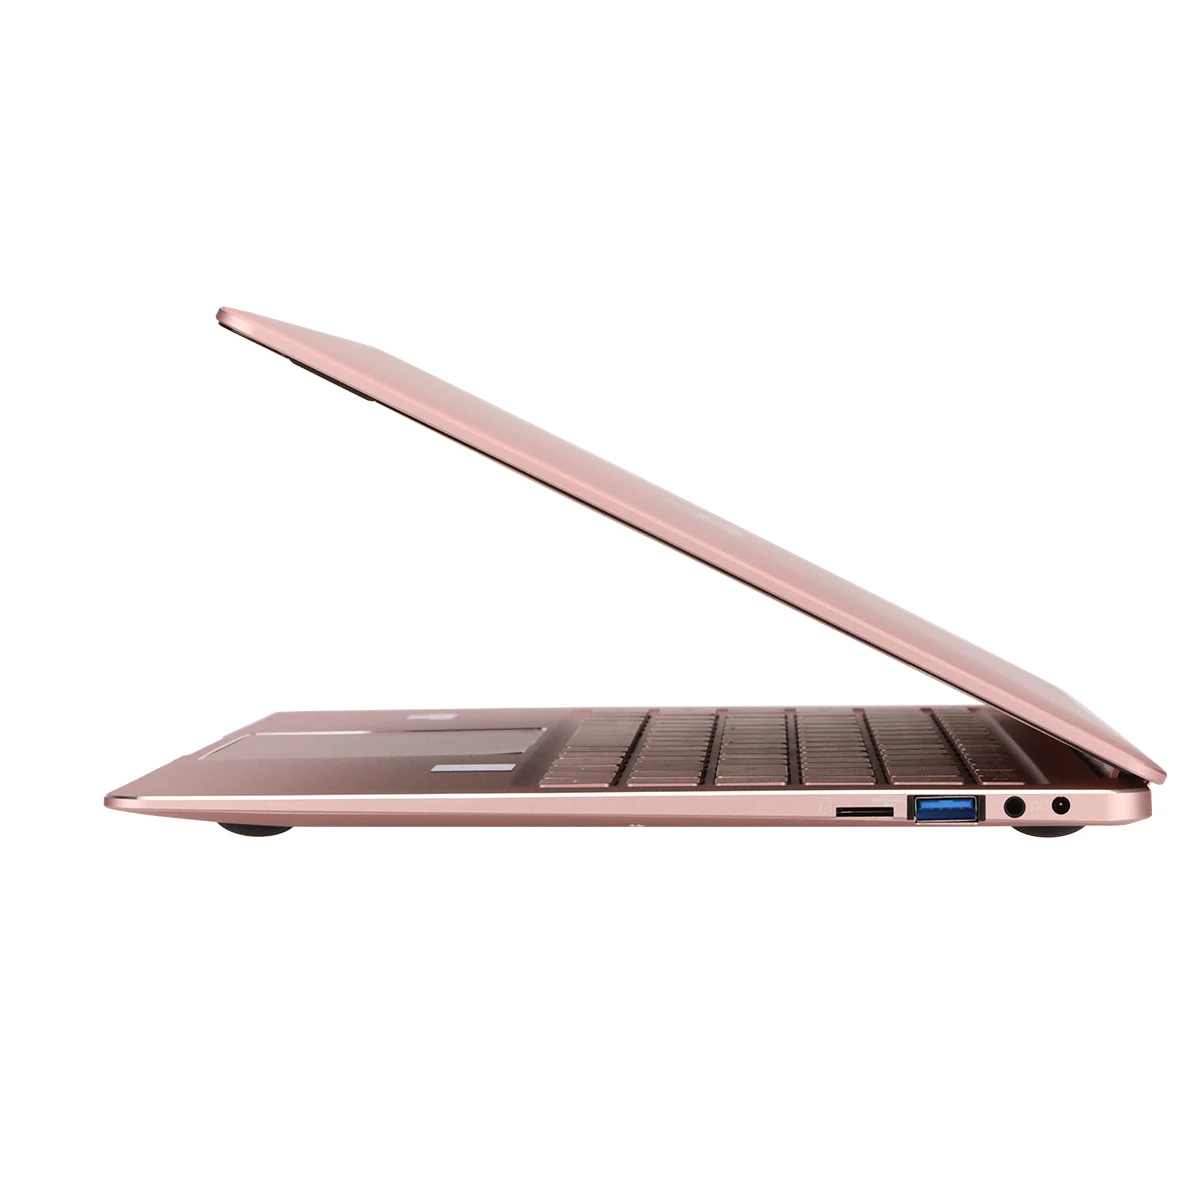 

Pc Portable cheap laptops 14inch computers N3450 + 6G RAM + SSD 64 120 240 512G harddisk, Rose gold/silver